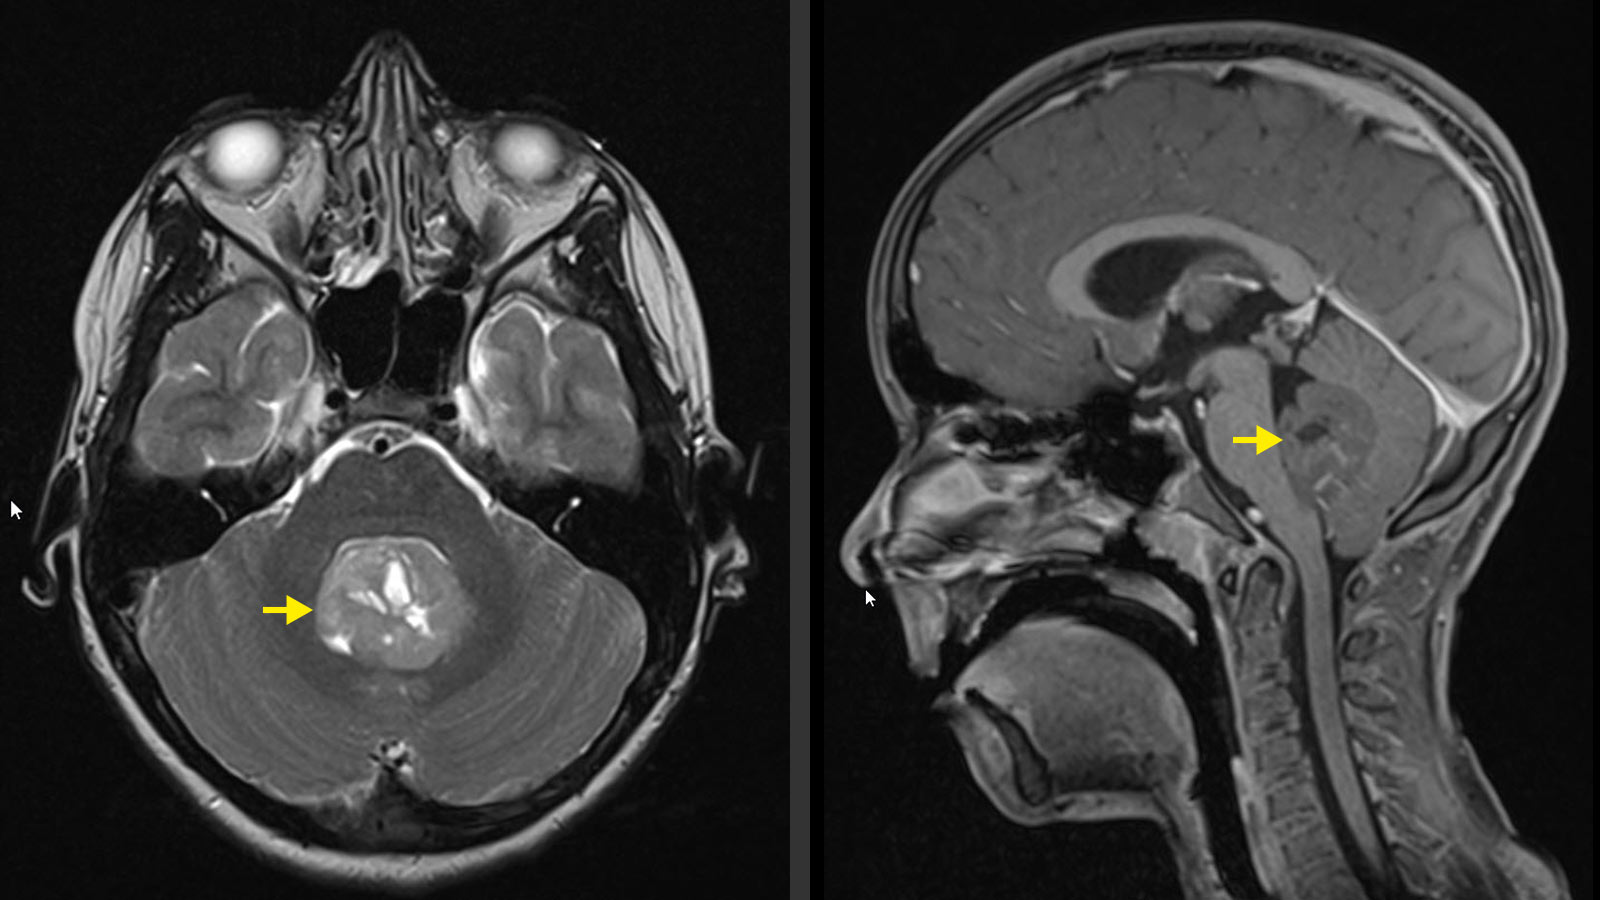 MRI image of a medulloblastoma. Tumor is marked with yellow arrows.